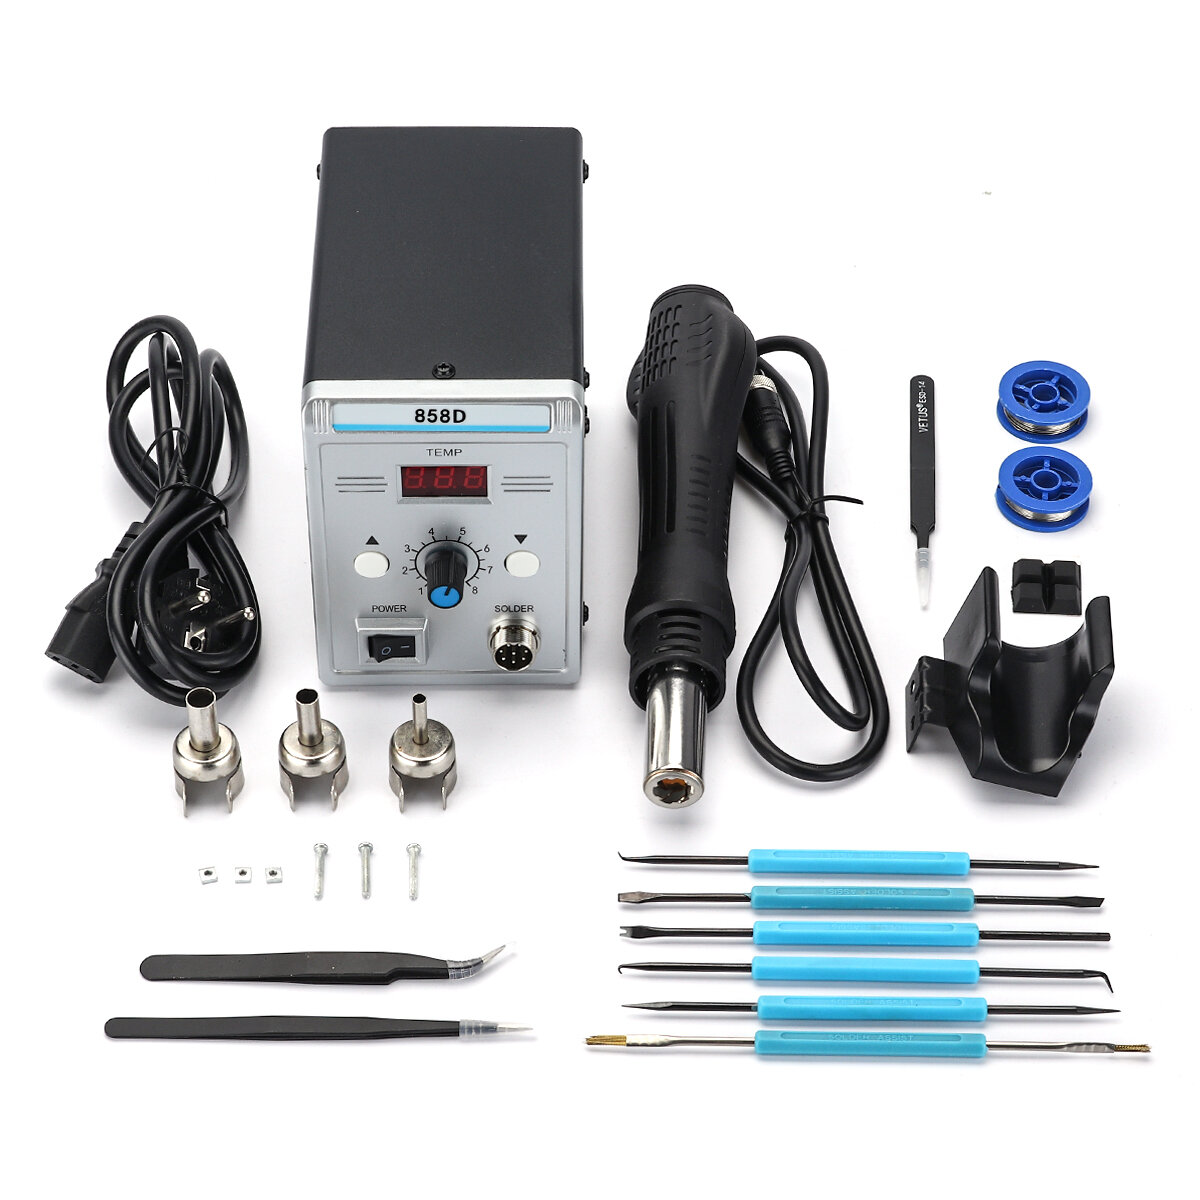 best price,858d,700w,soldering,station,discount